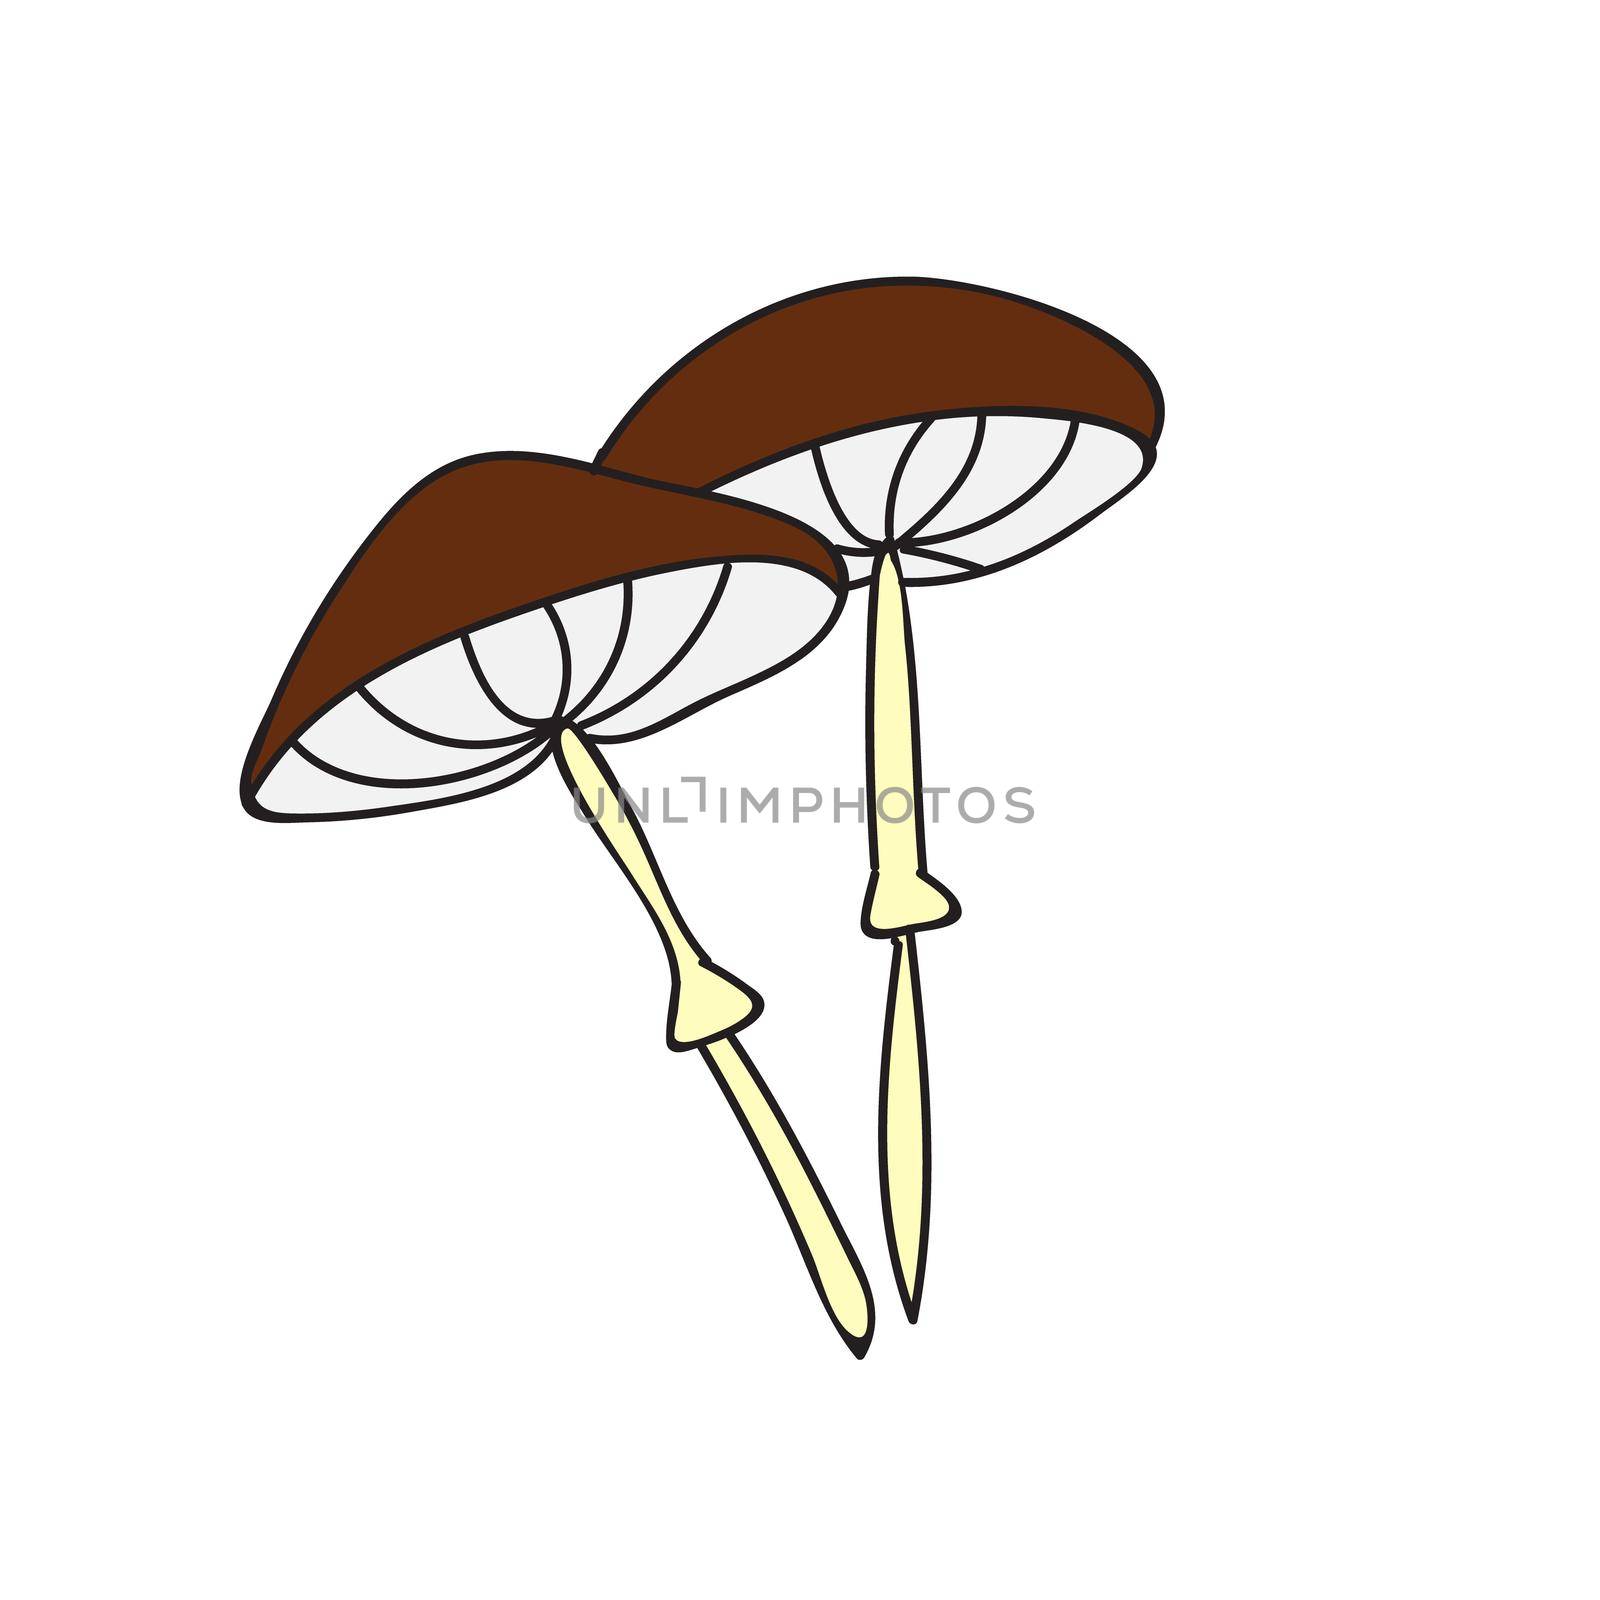 Cute mushroom in doodle style. Poisonous mushroom, toadstool. Vector isolated hand drawn illustration